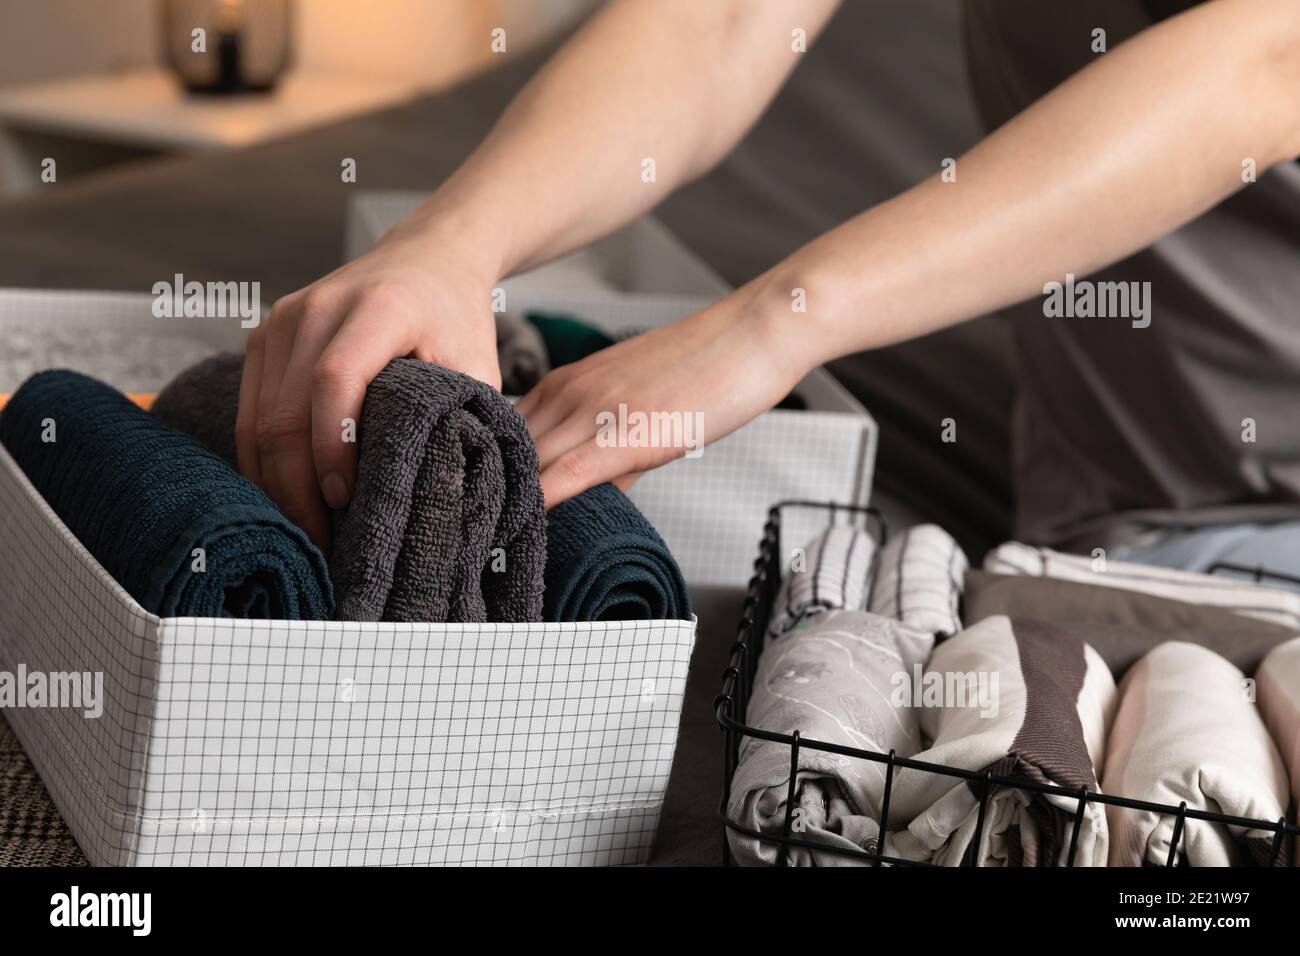 Vertical storage of clothing.Women organize clothes in a modern bedroom. Women sorting clothes in baskets room cleaning concept. Stock Photo